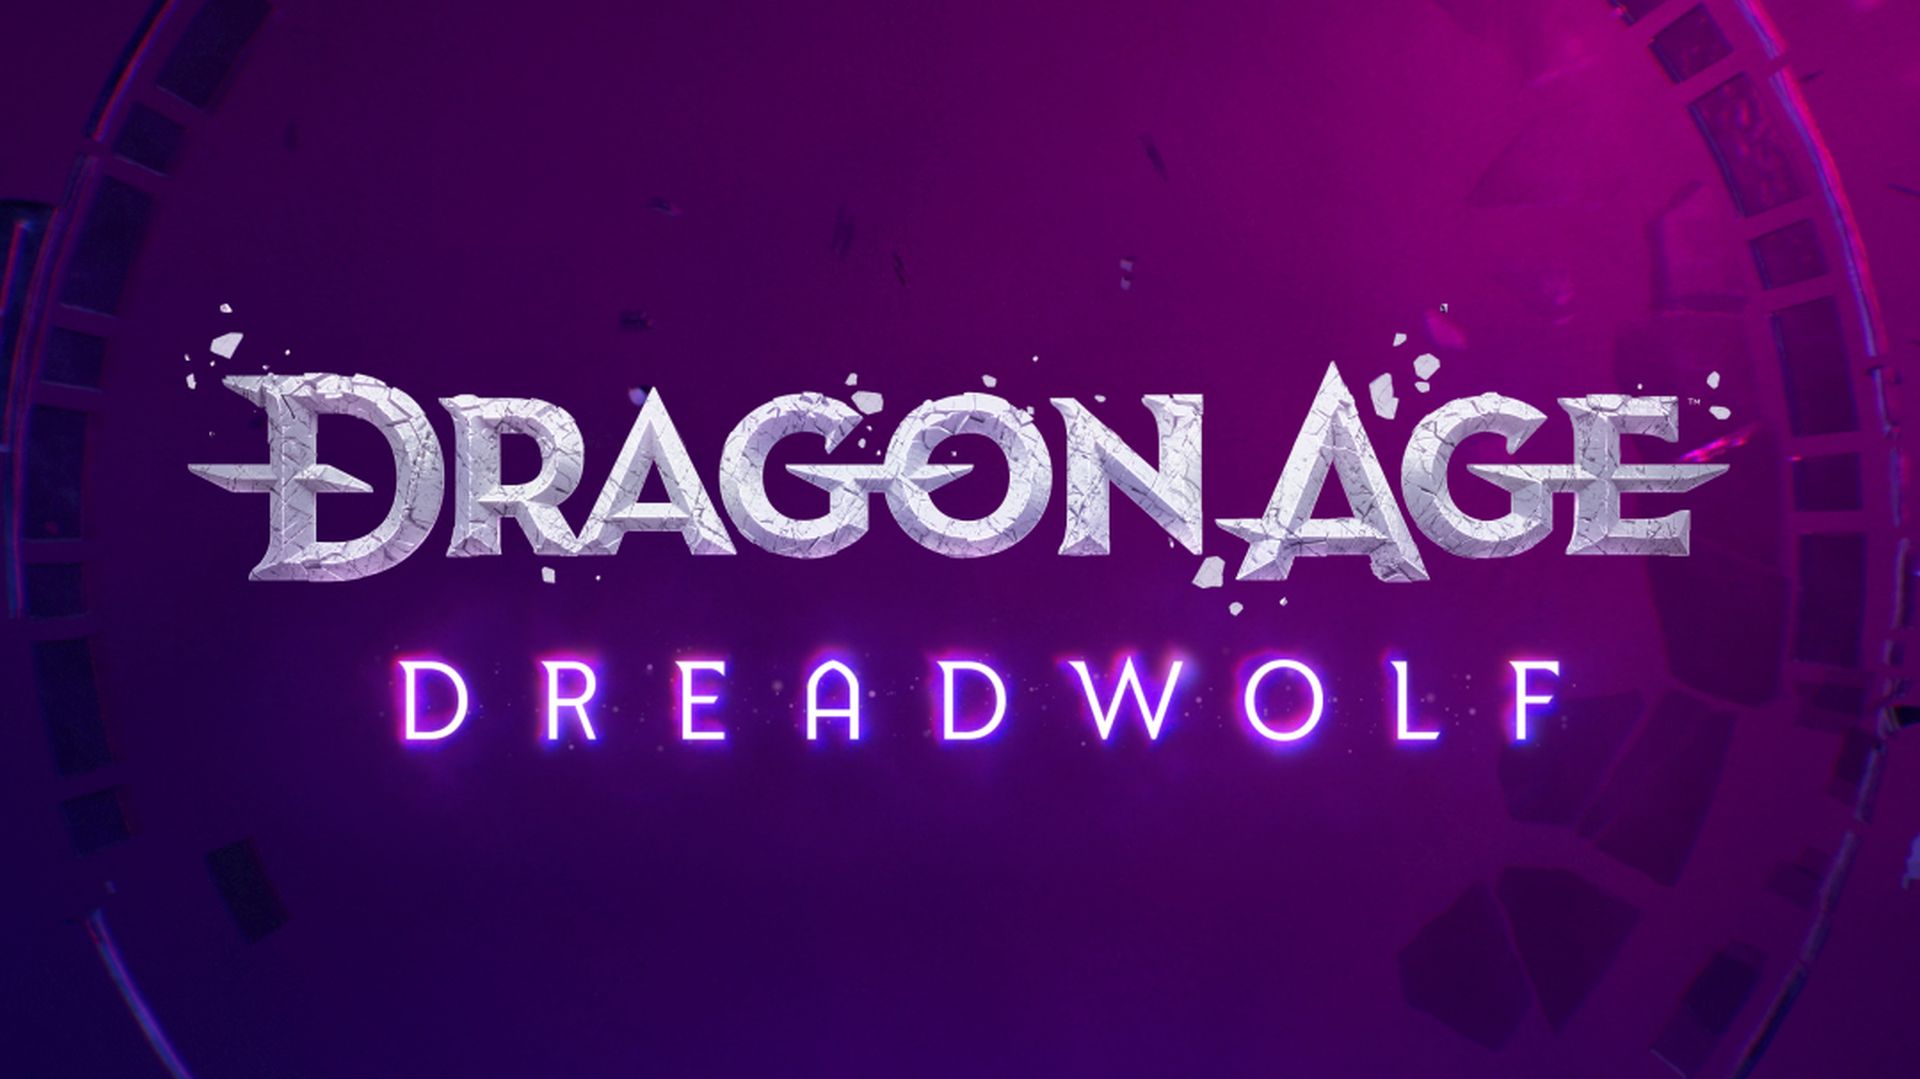 Dreadwolf – BioWare is Continuing to “Build, Polish, and Tune” the Game